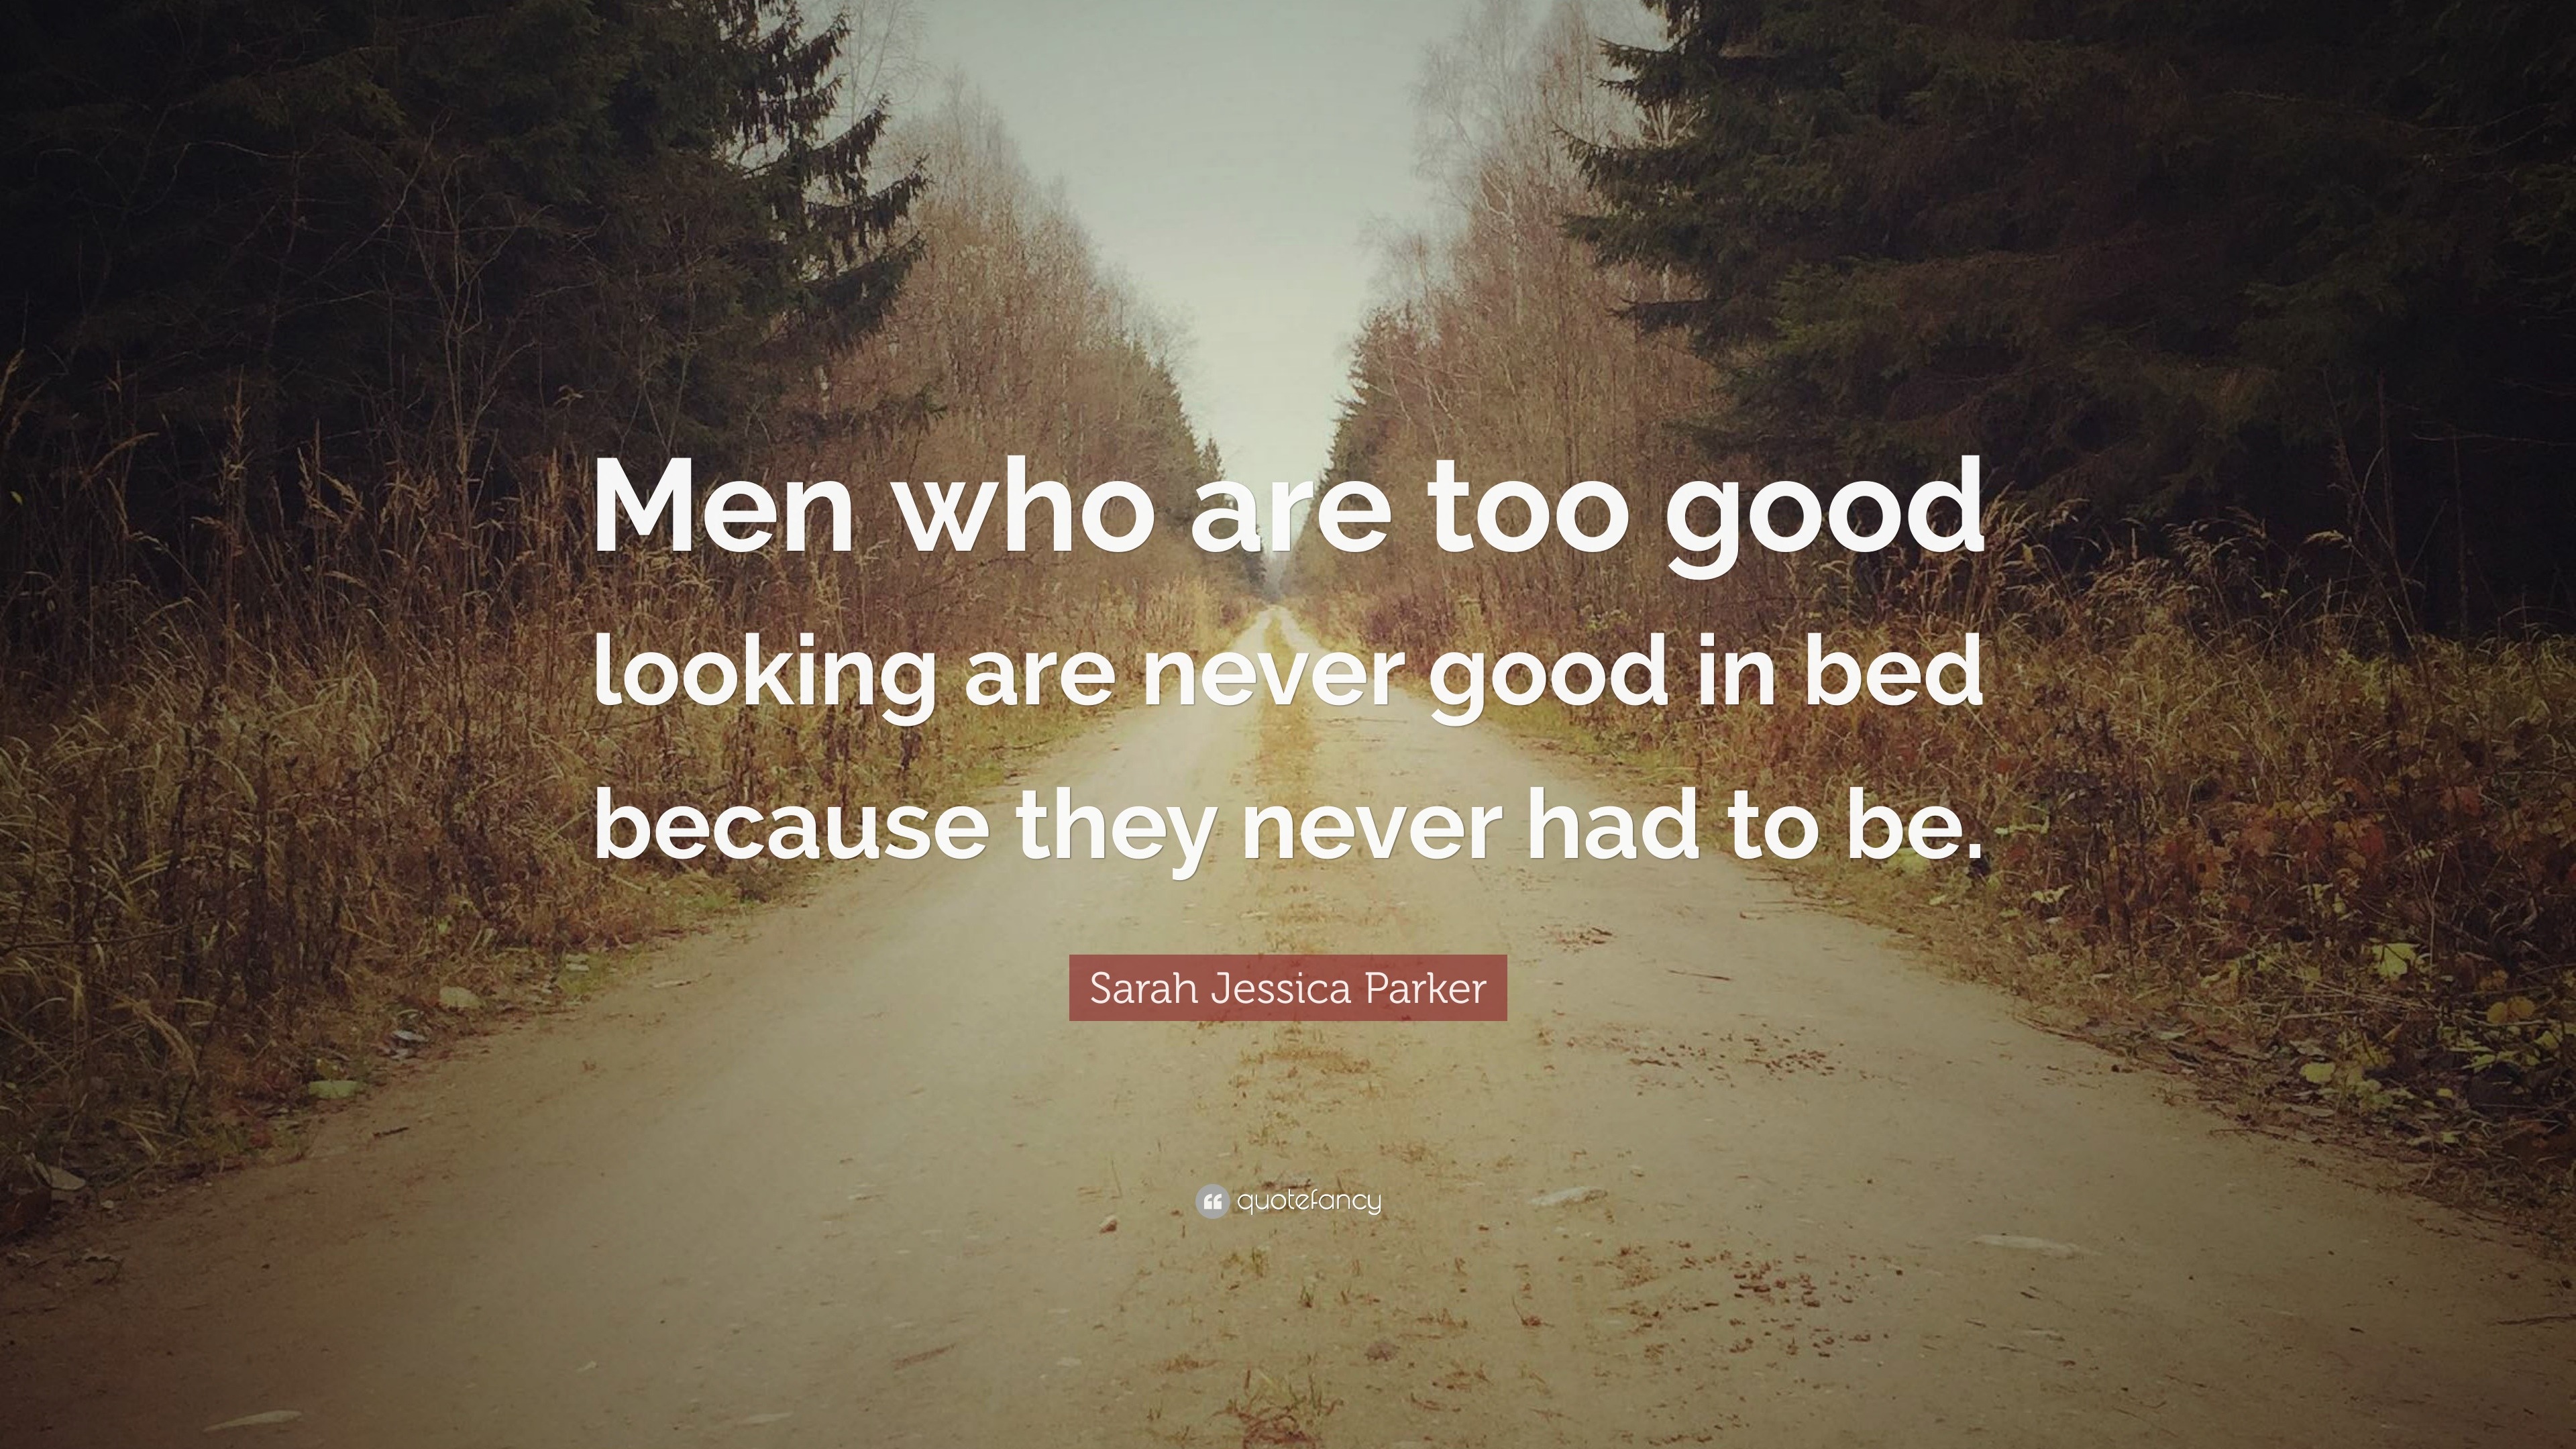 Men who are too good looking are never good - Quote